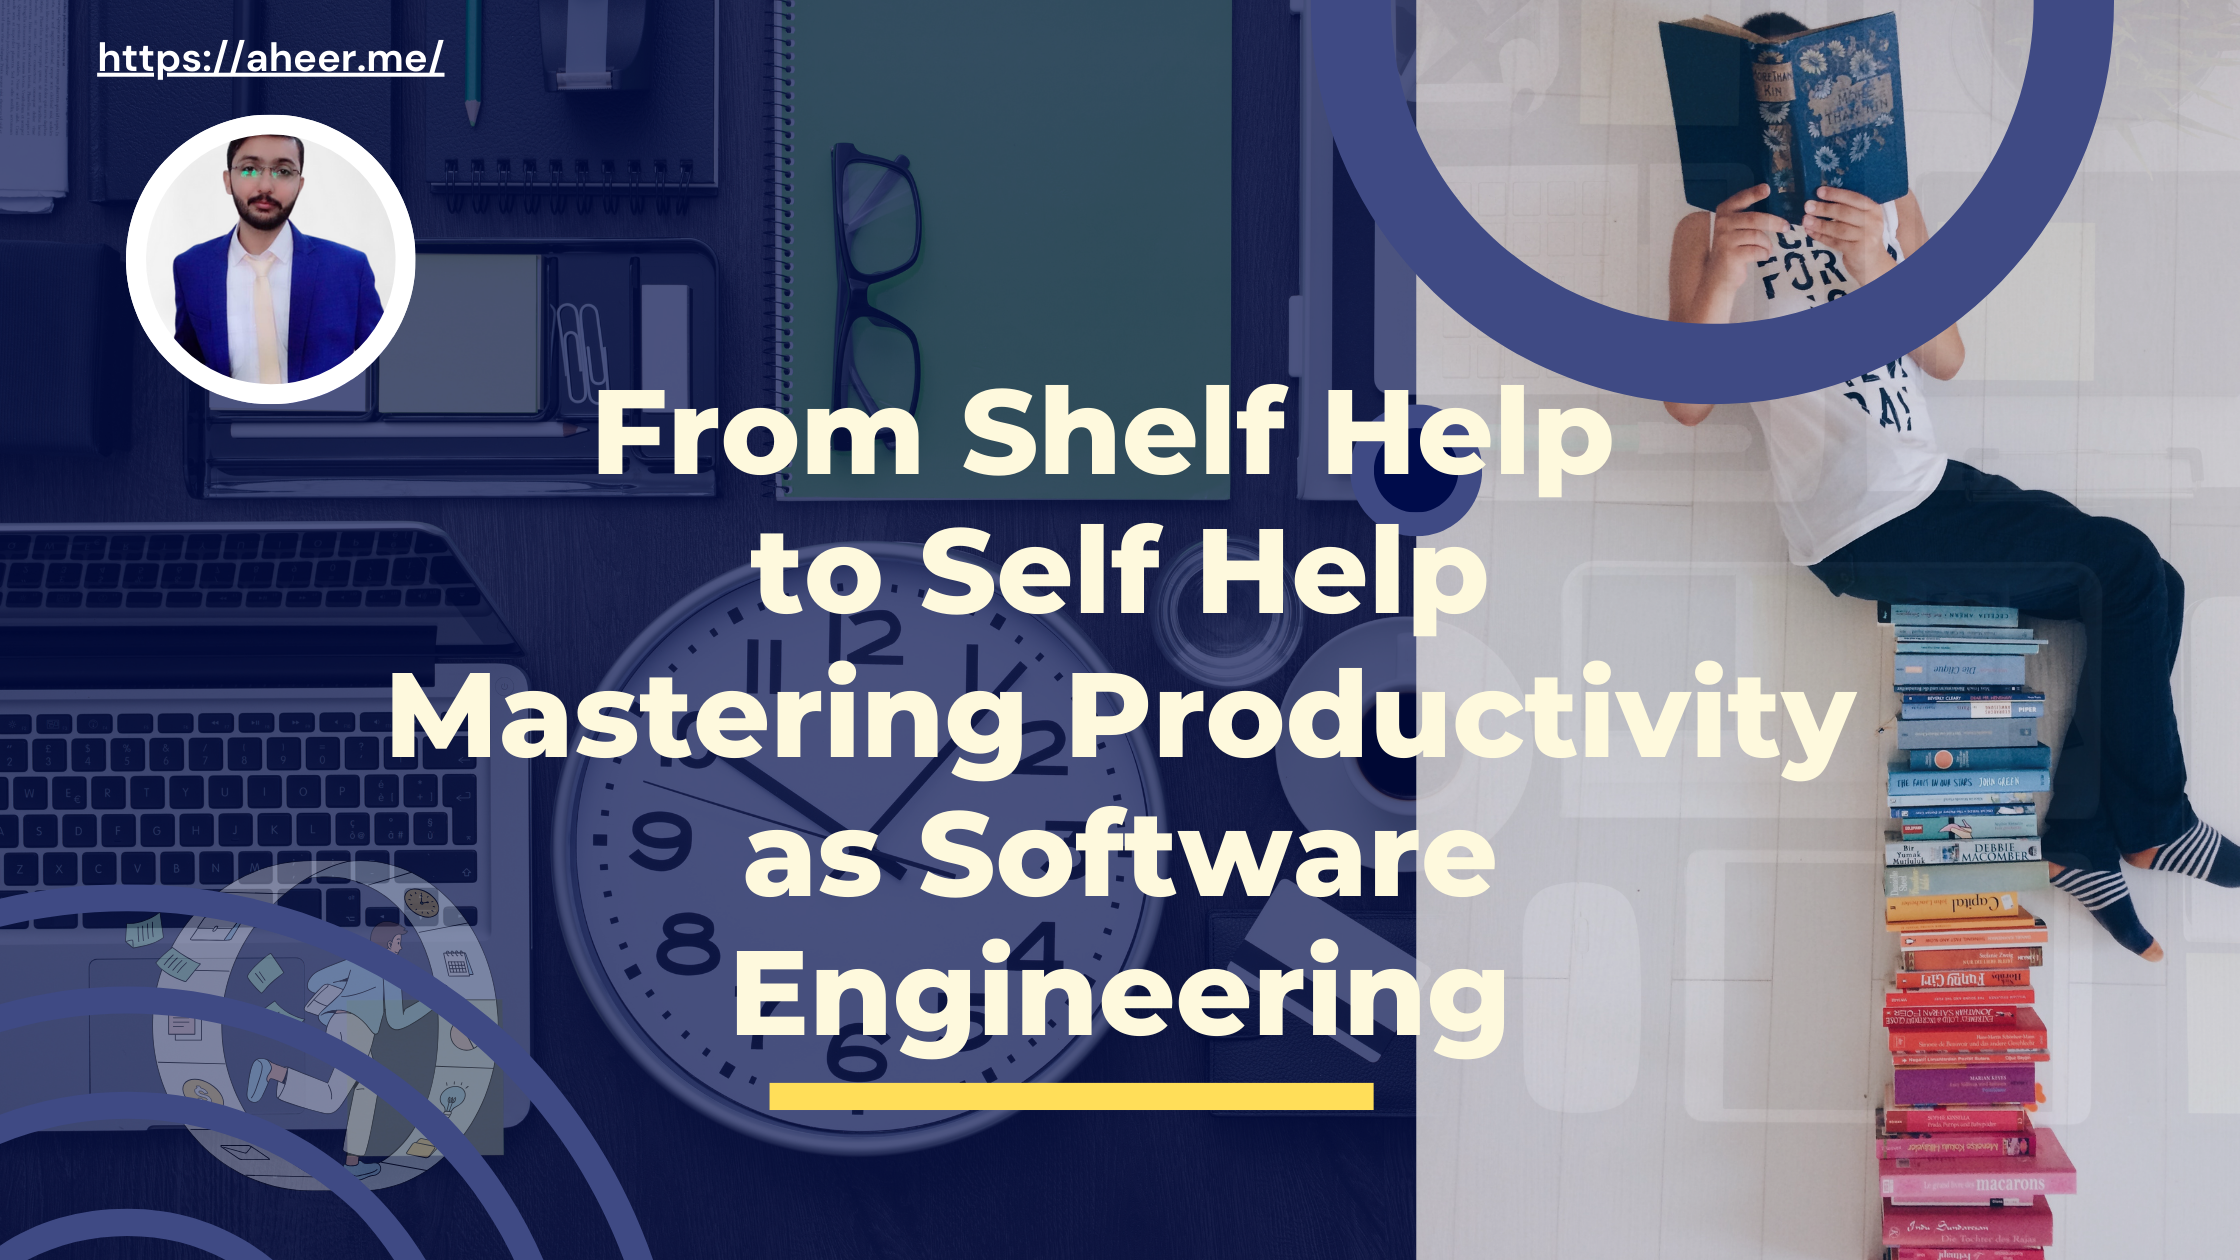 From Shelf Help to Self Help: Mastering Productivity as Software Engineering